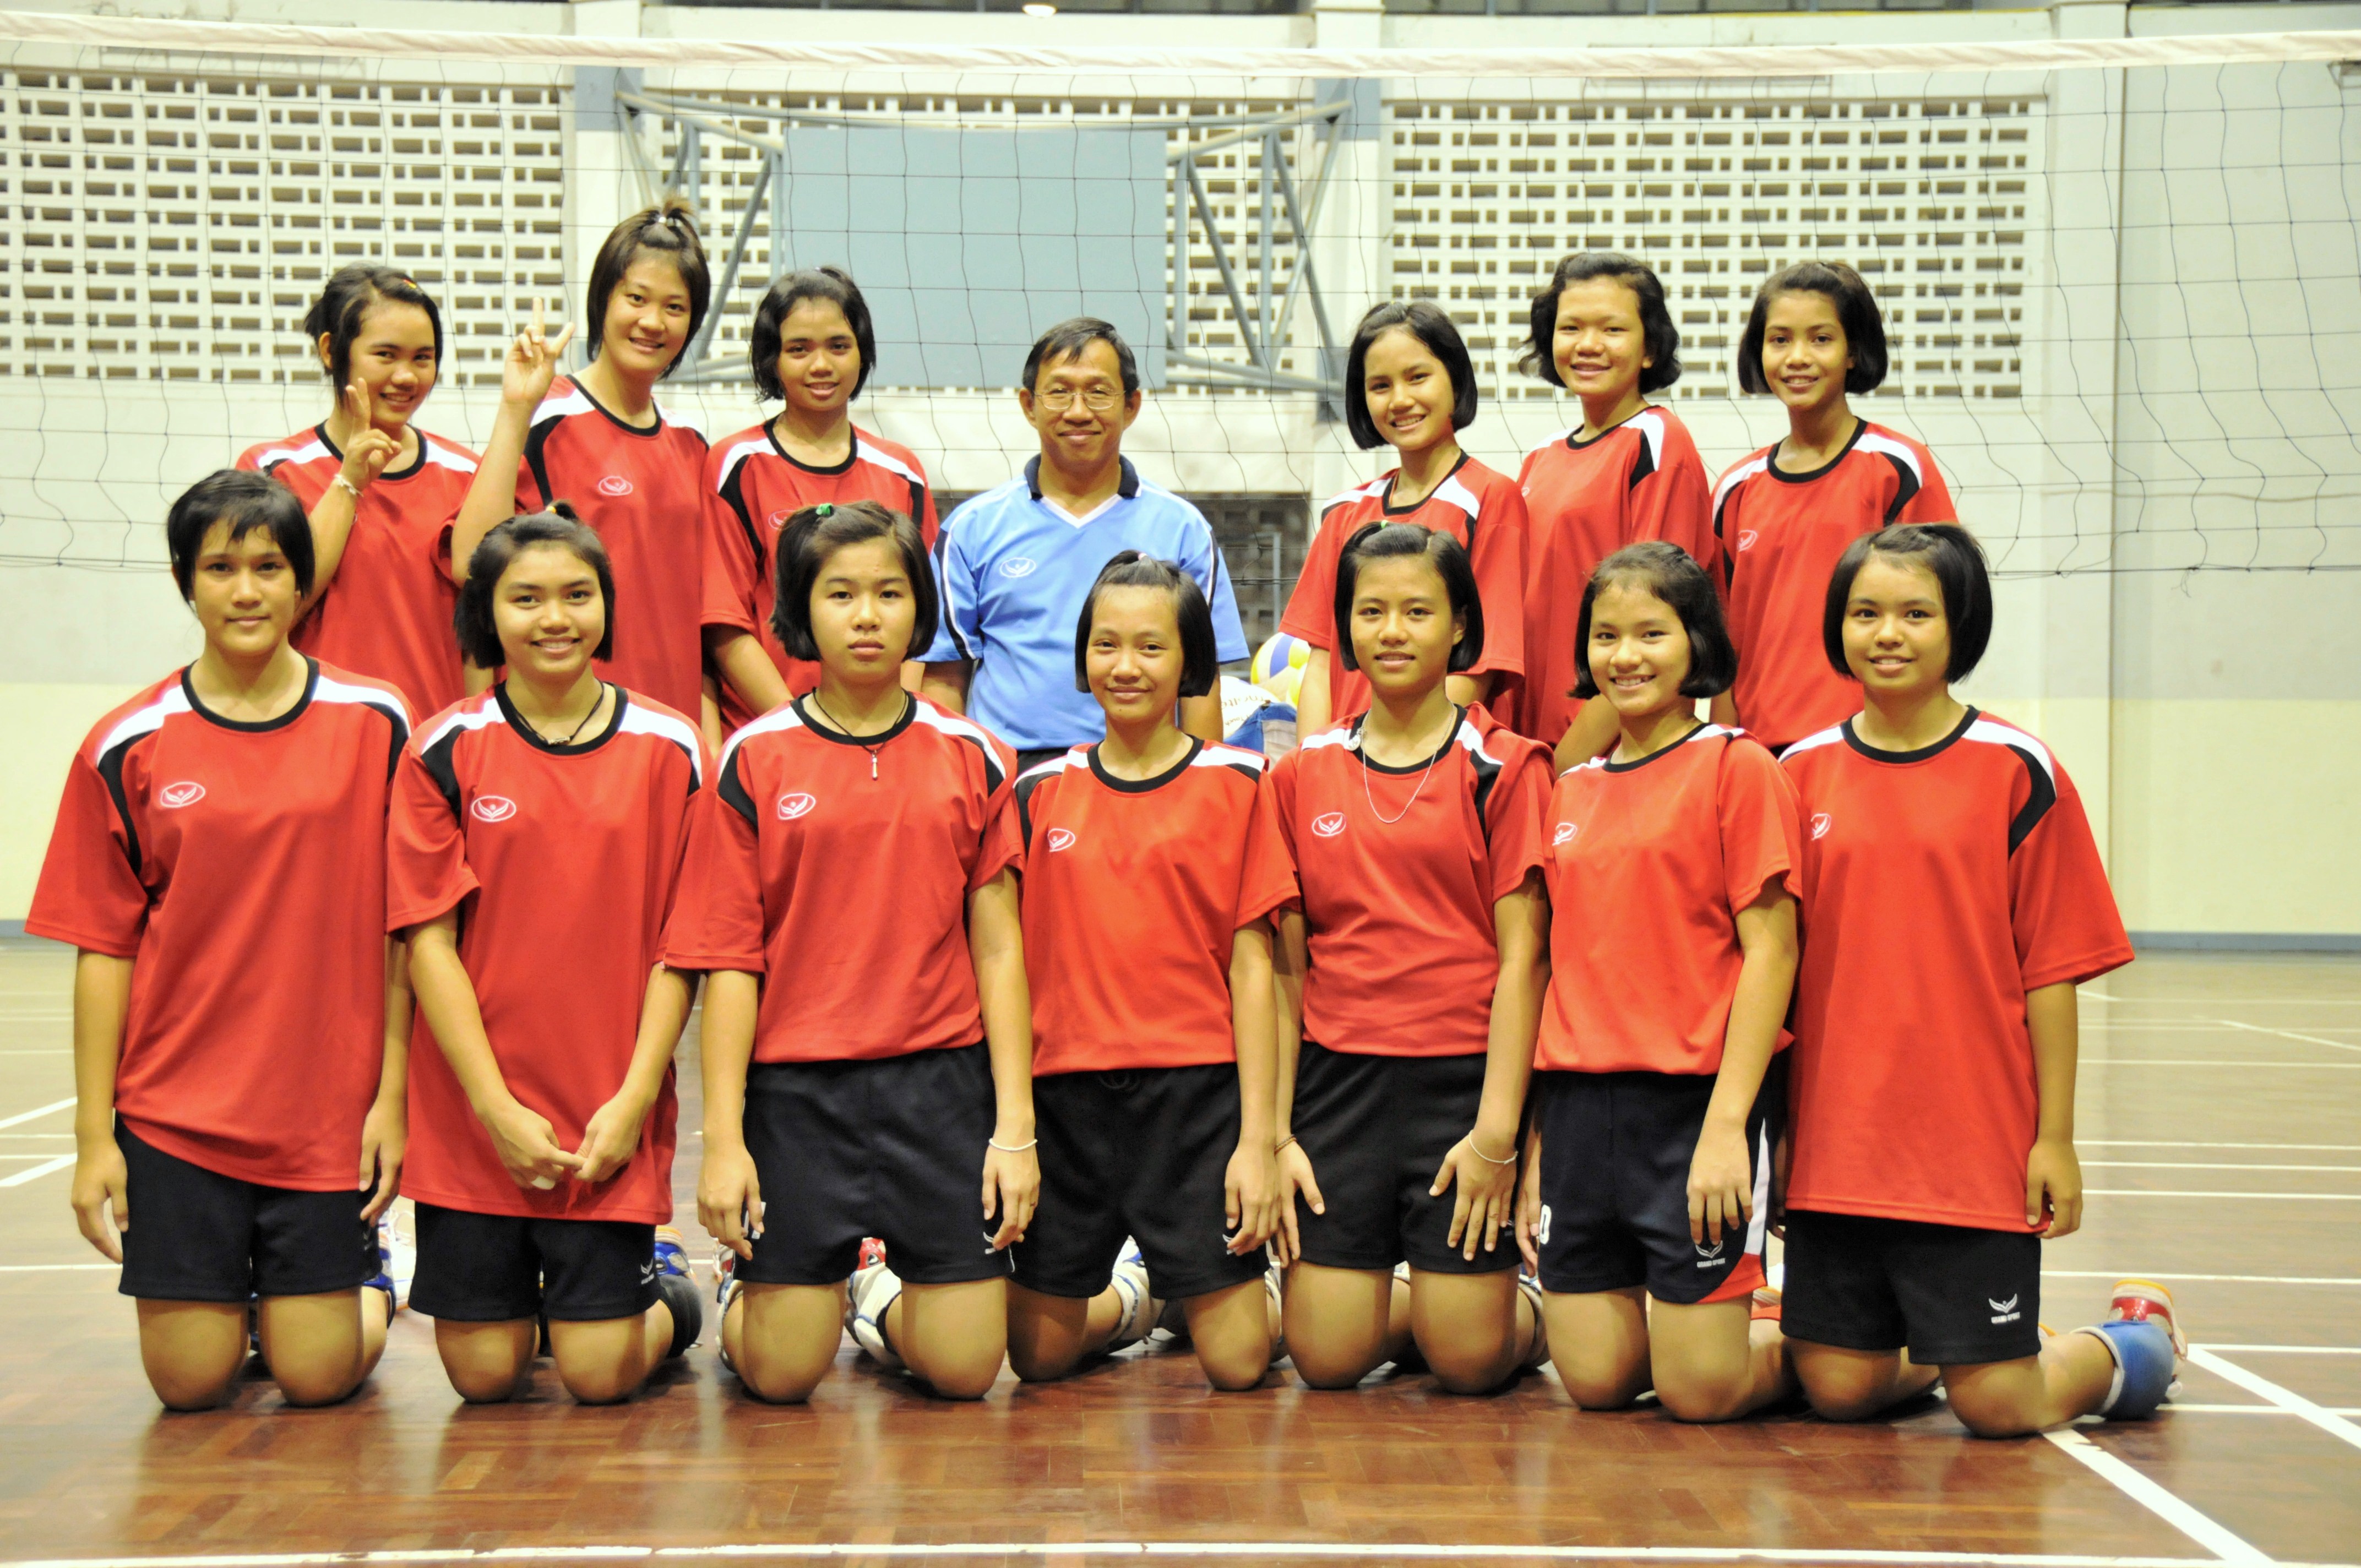 Mr Woo Kok Oon, a Physical Education teacher, took Professional Development Leave to learn from Volleyball teams in Thailand. Photo Credit: Mr Woo Kok Oon